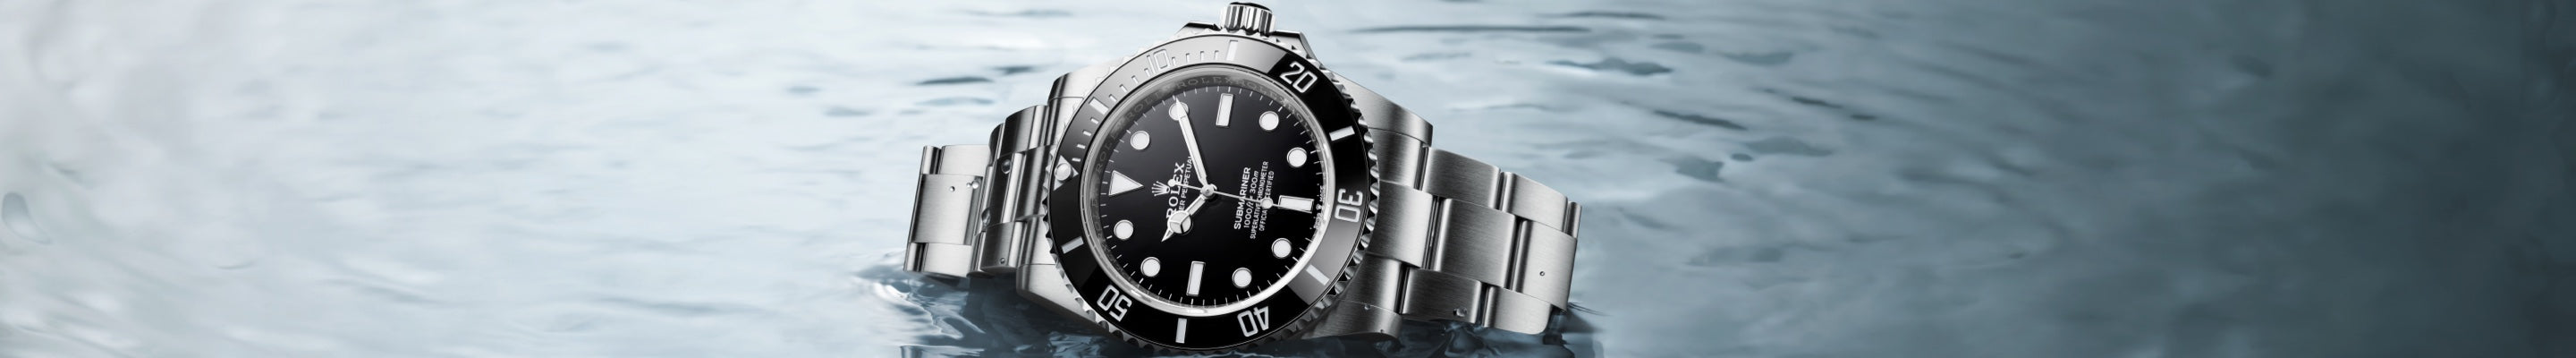 Rolex Submariner with Black Dial on Side in Water